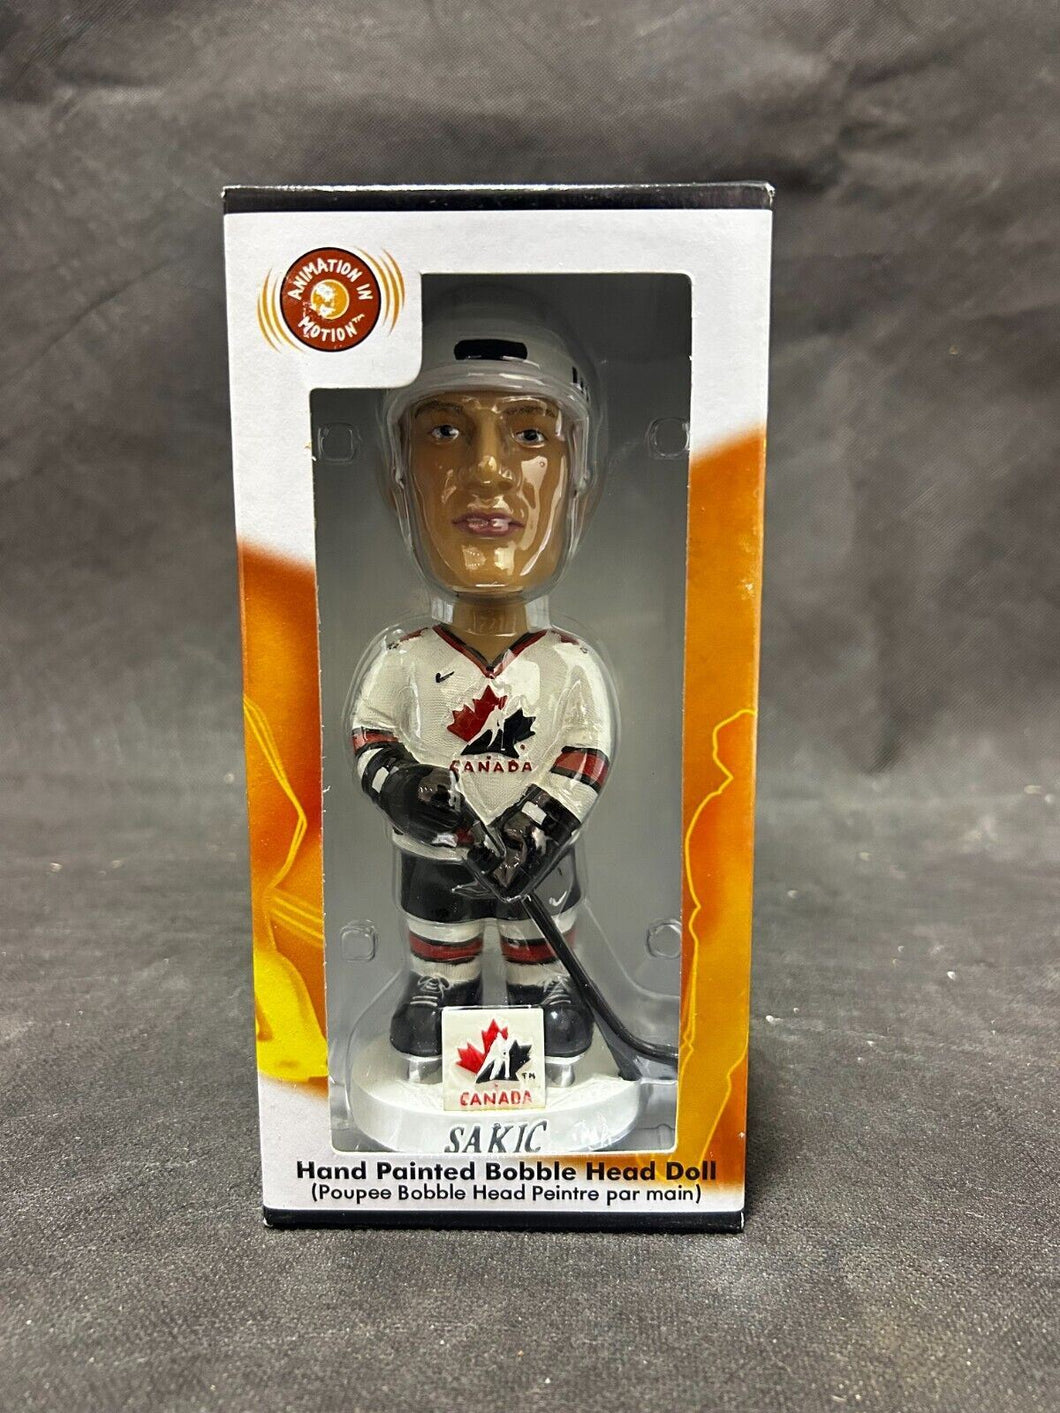 2002 Olympics Collectible Hand Painted Bobble Head Doll of Sakic Team Canada